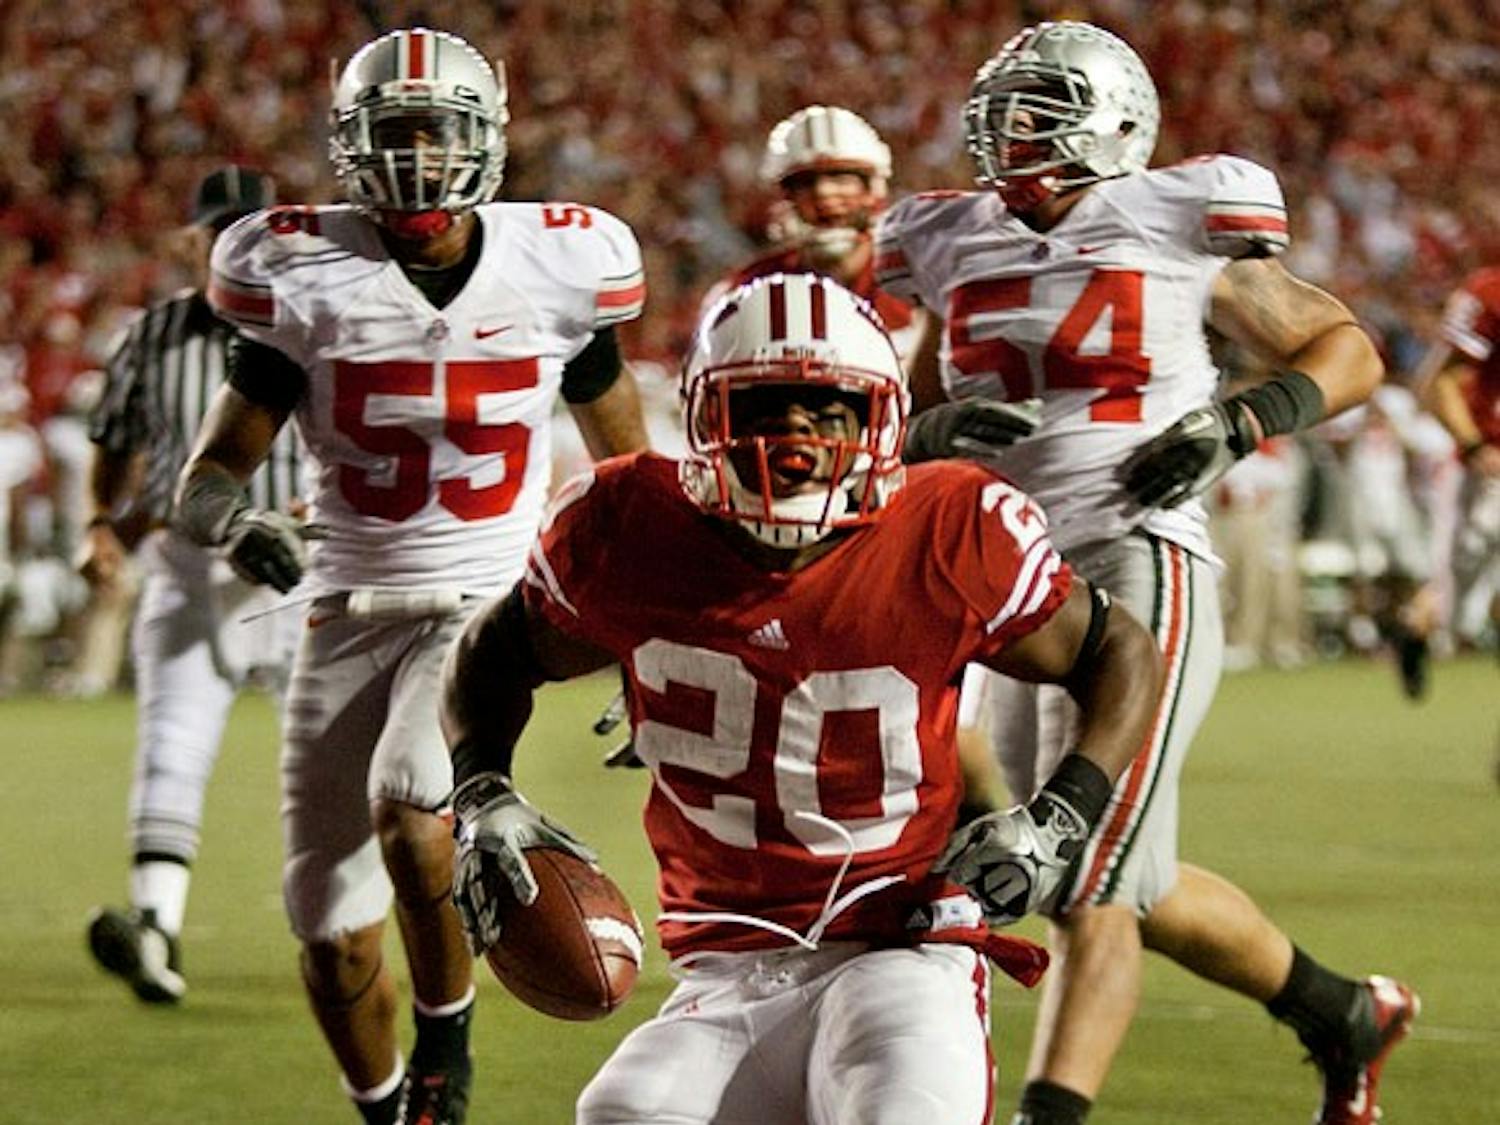 Badgers upset Buckeyes, make Ohio State one-and-done at No. 1